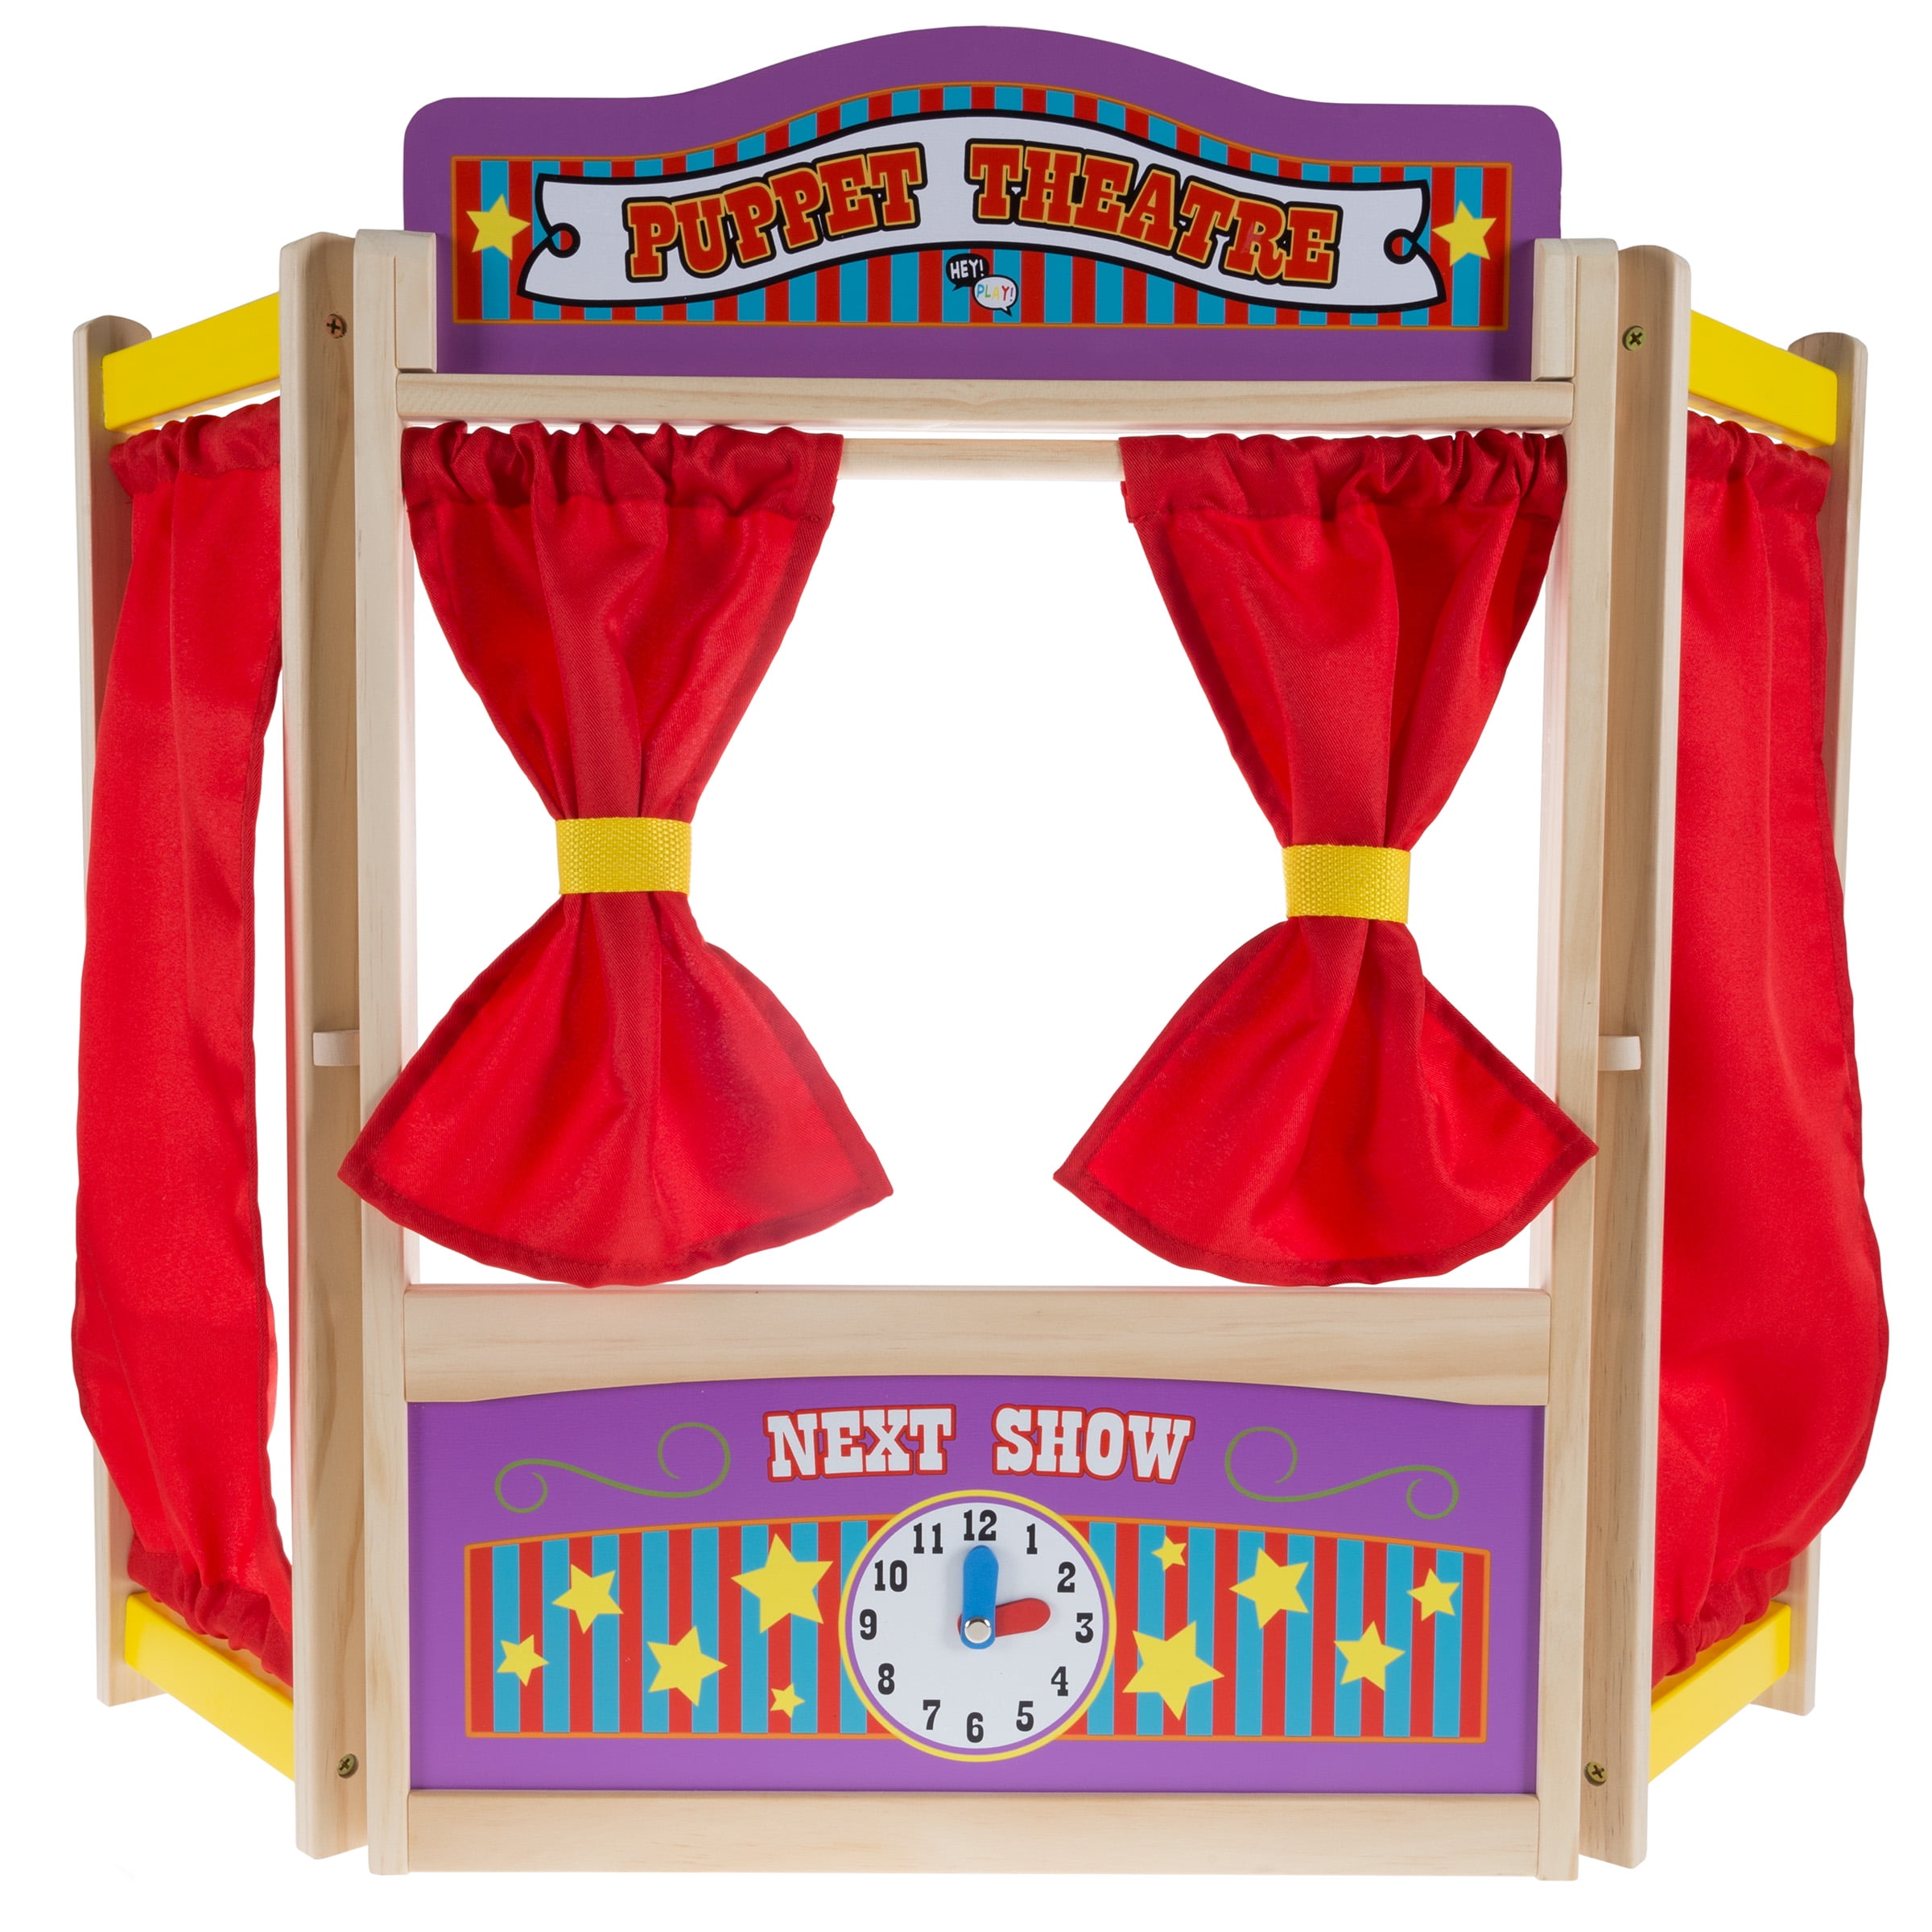 Lakeshore Puppet Tabletop Theater Theatre Velour Curtains HH365 Sturdy Hardwood 